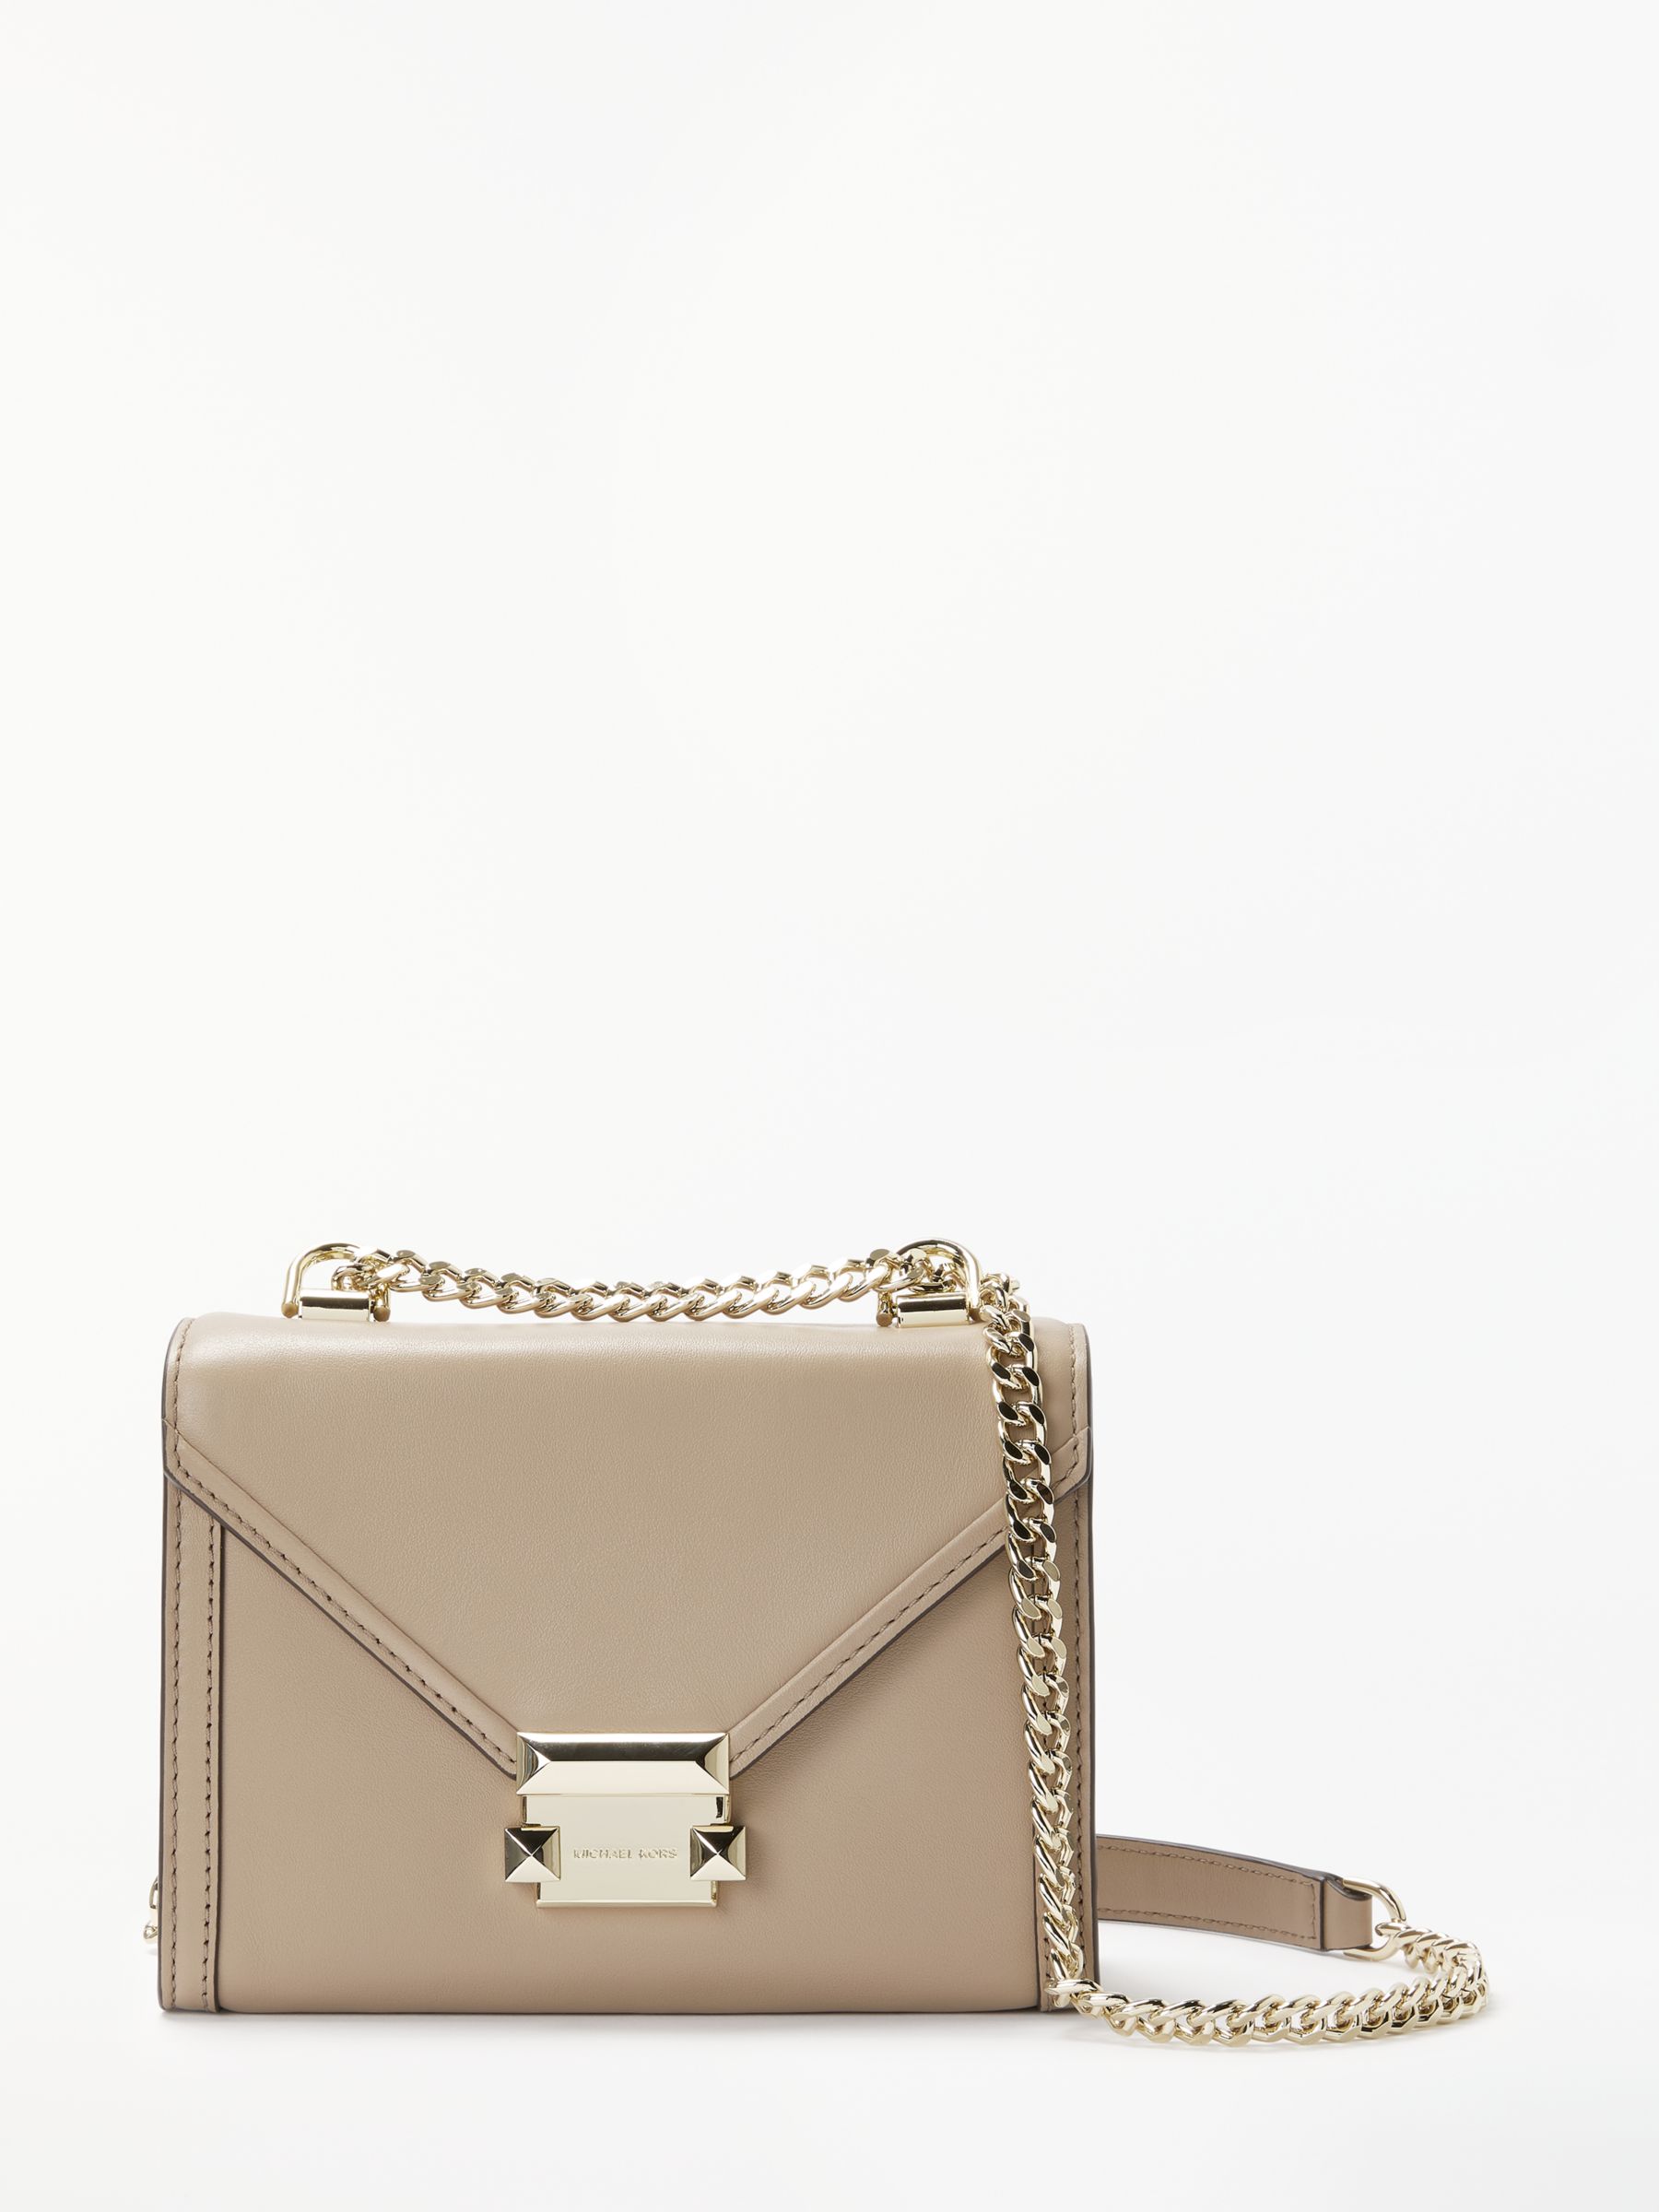 whitney small leather shoulder bag